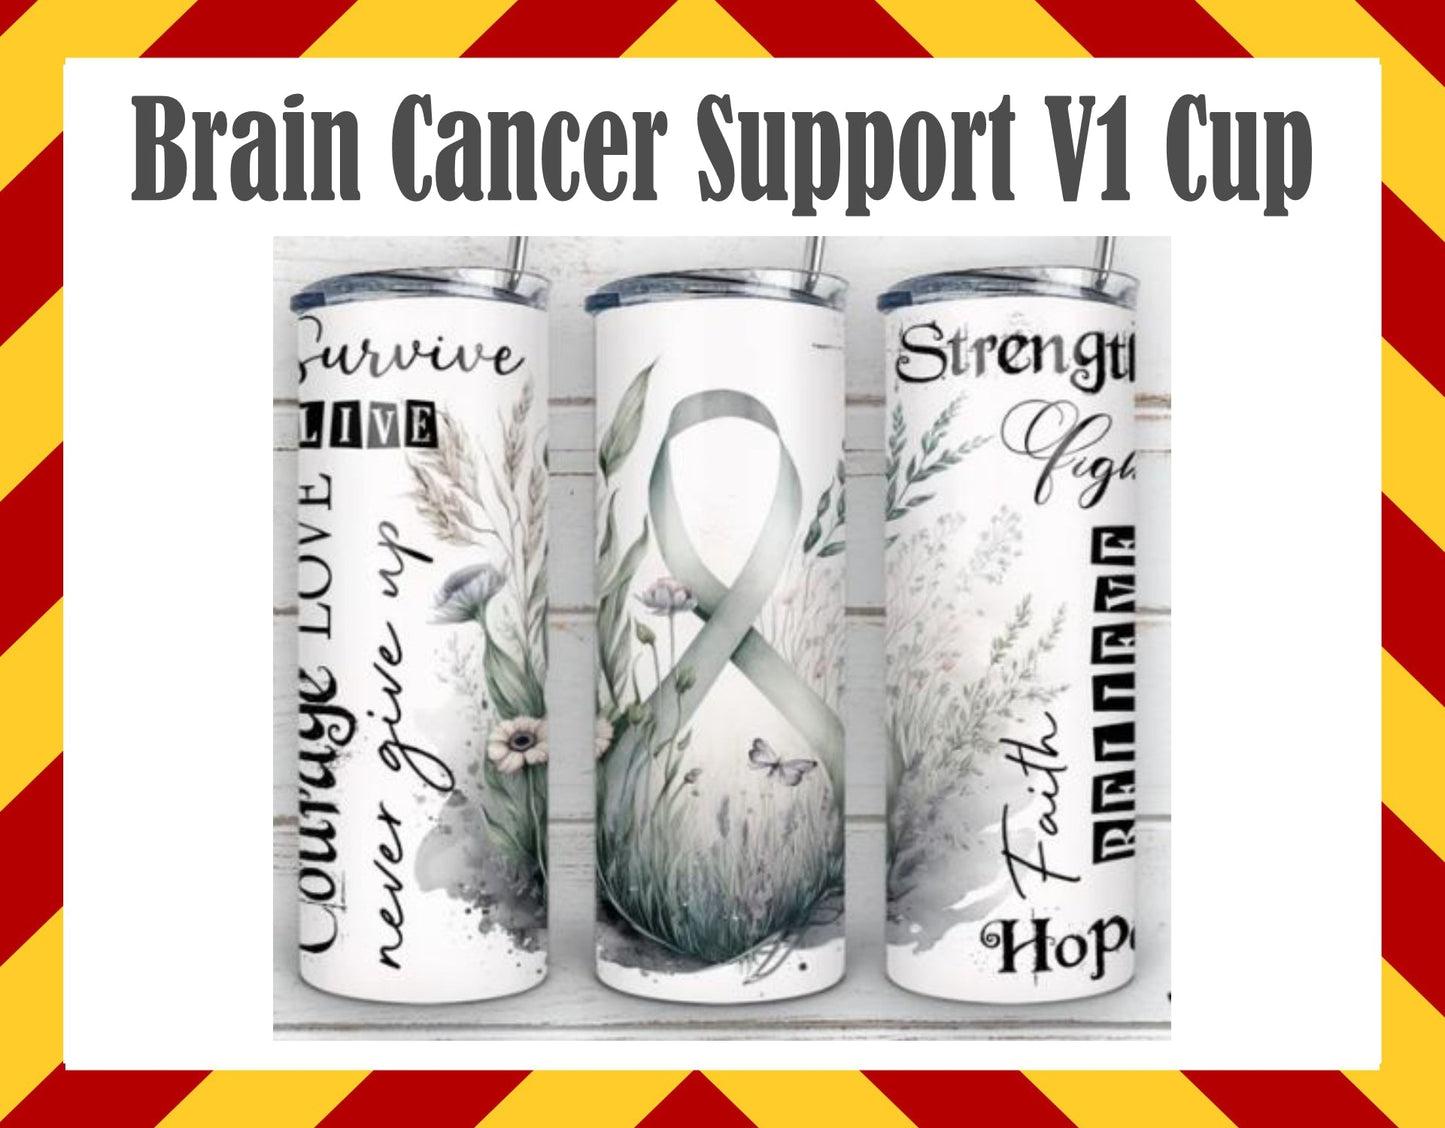 Drink Water Cup - Brain Cancer Support Cup Design